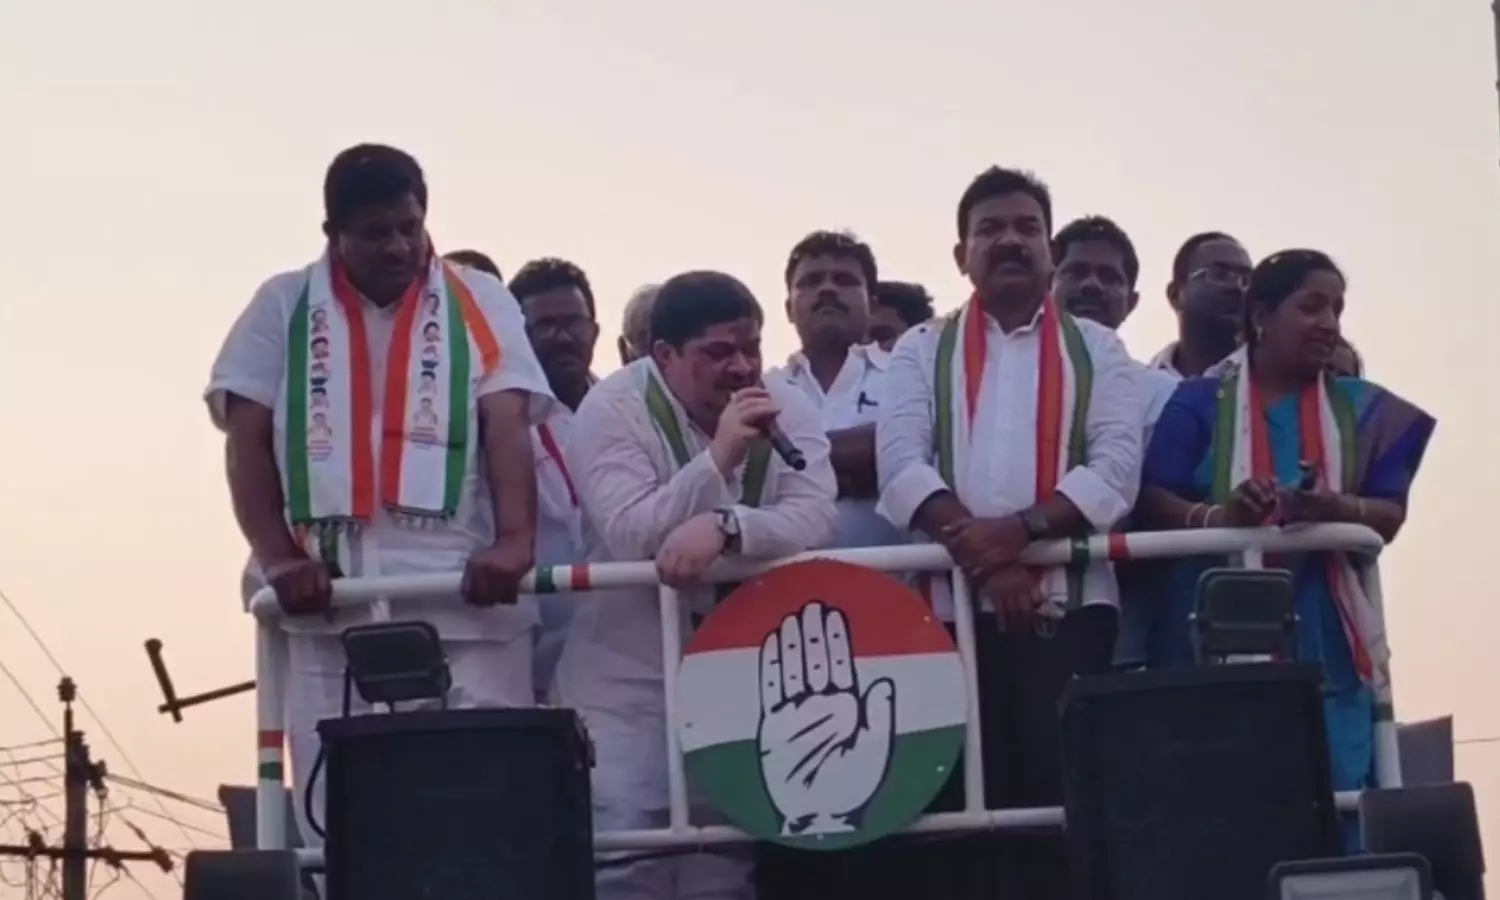 Congress Is Credited With Implementing The Promises Within Two Days Says Ponnam Prabhakar